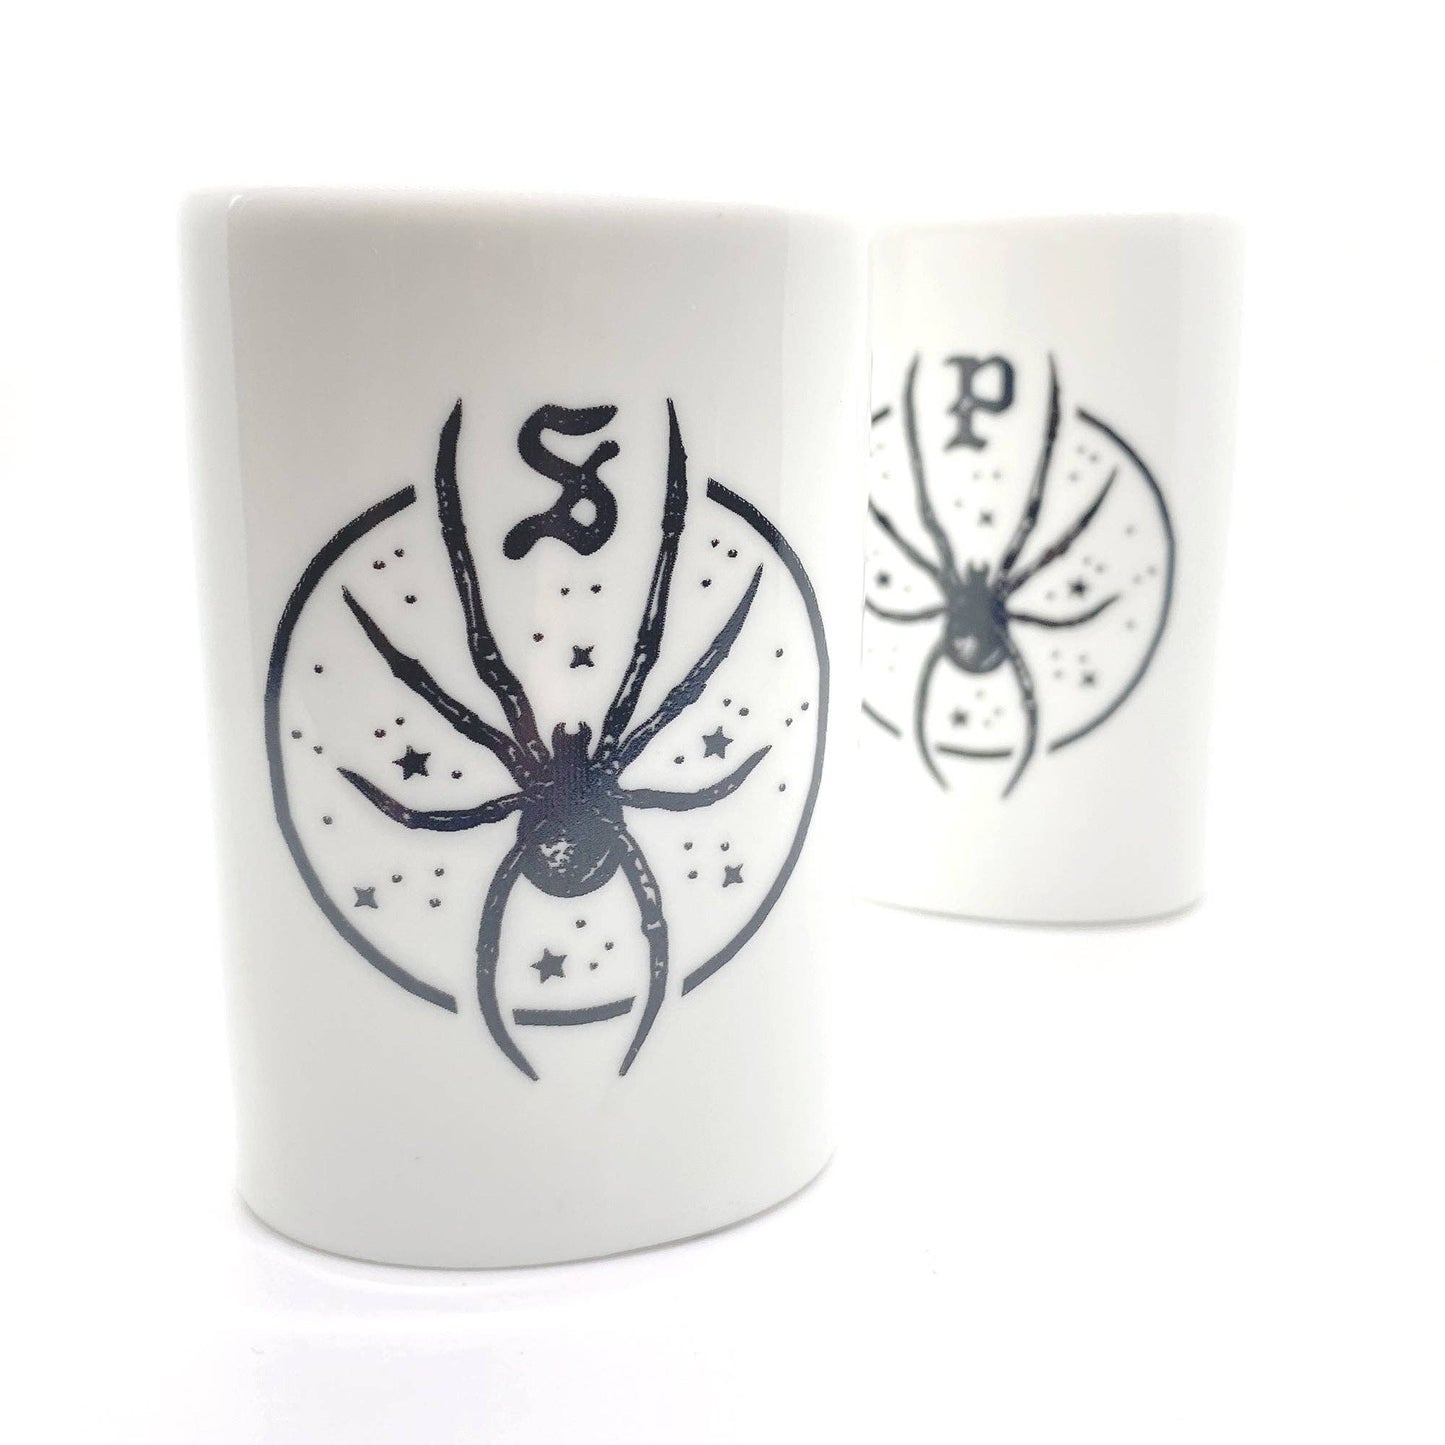 Spider Salt & Pepper Shakers | Seasoning Dispensers | Condiments Container